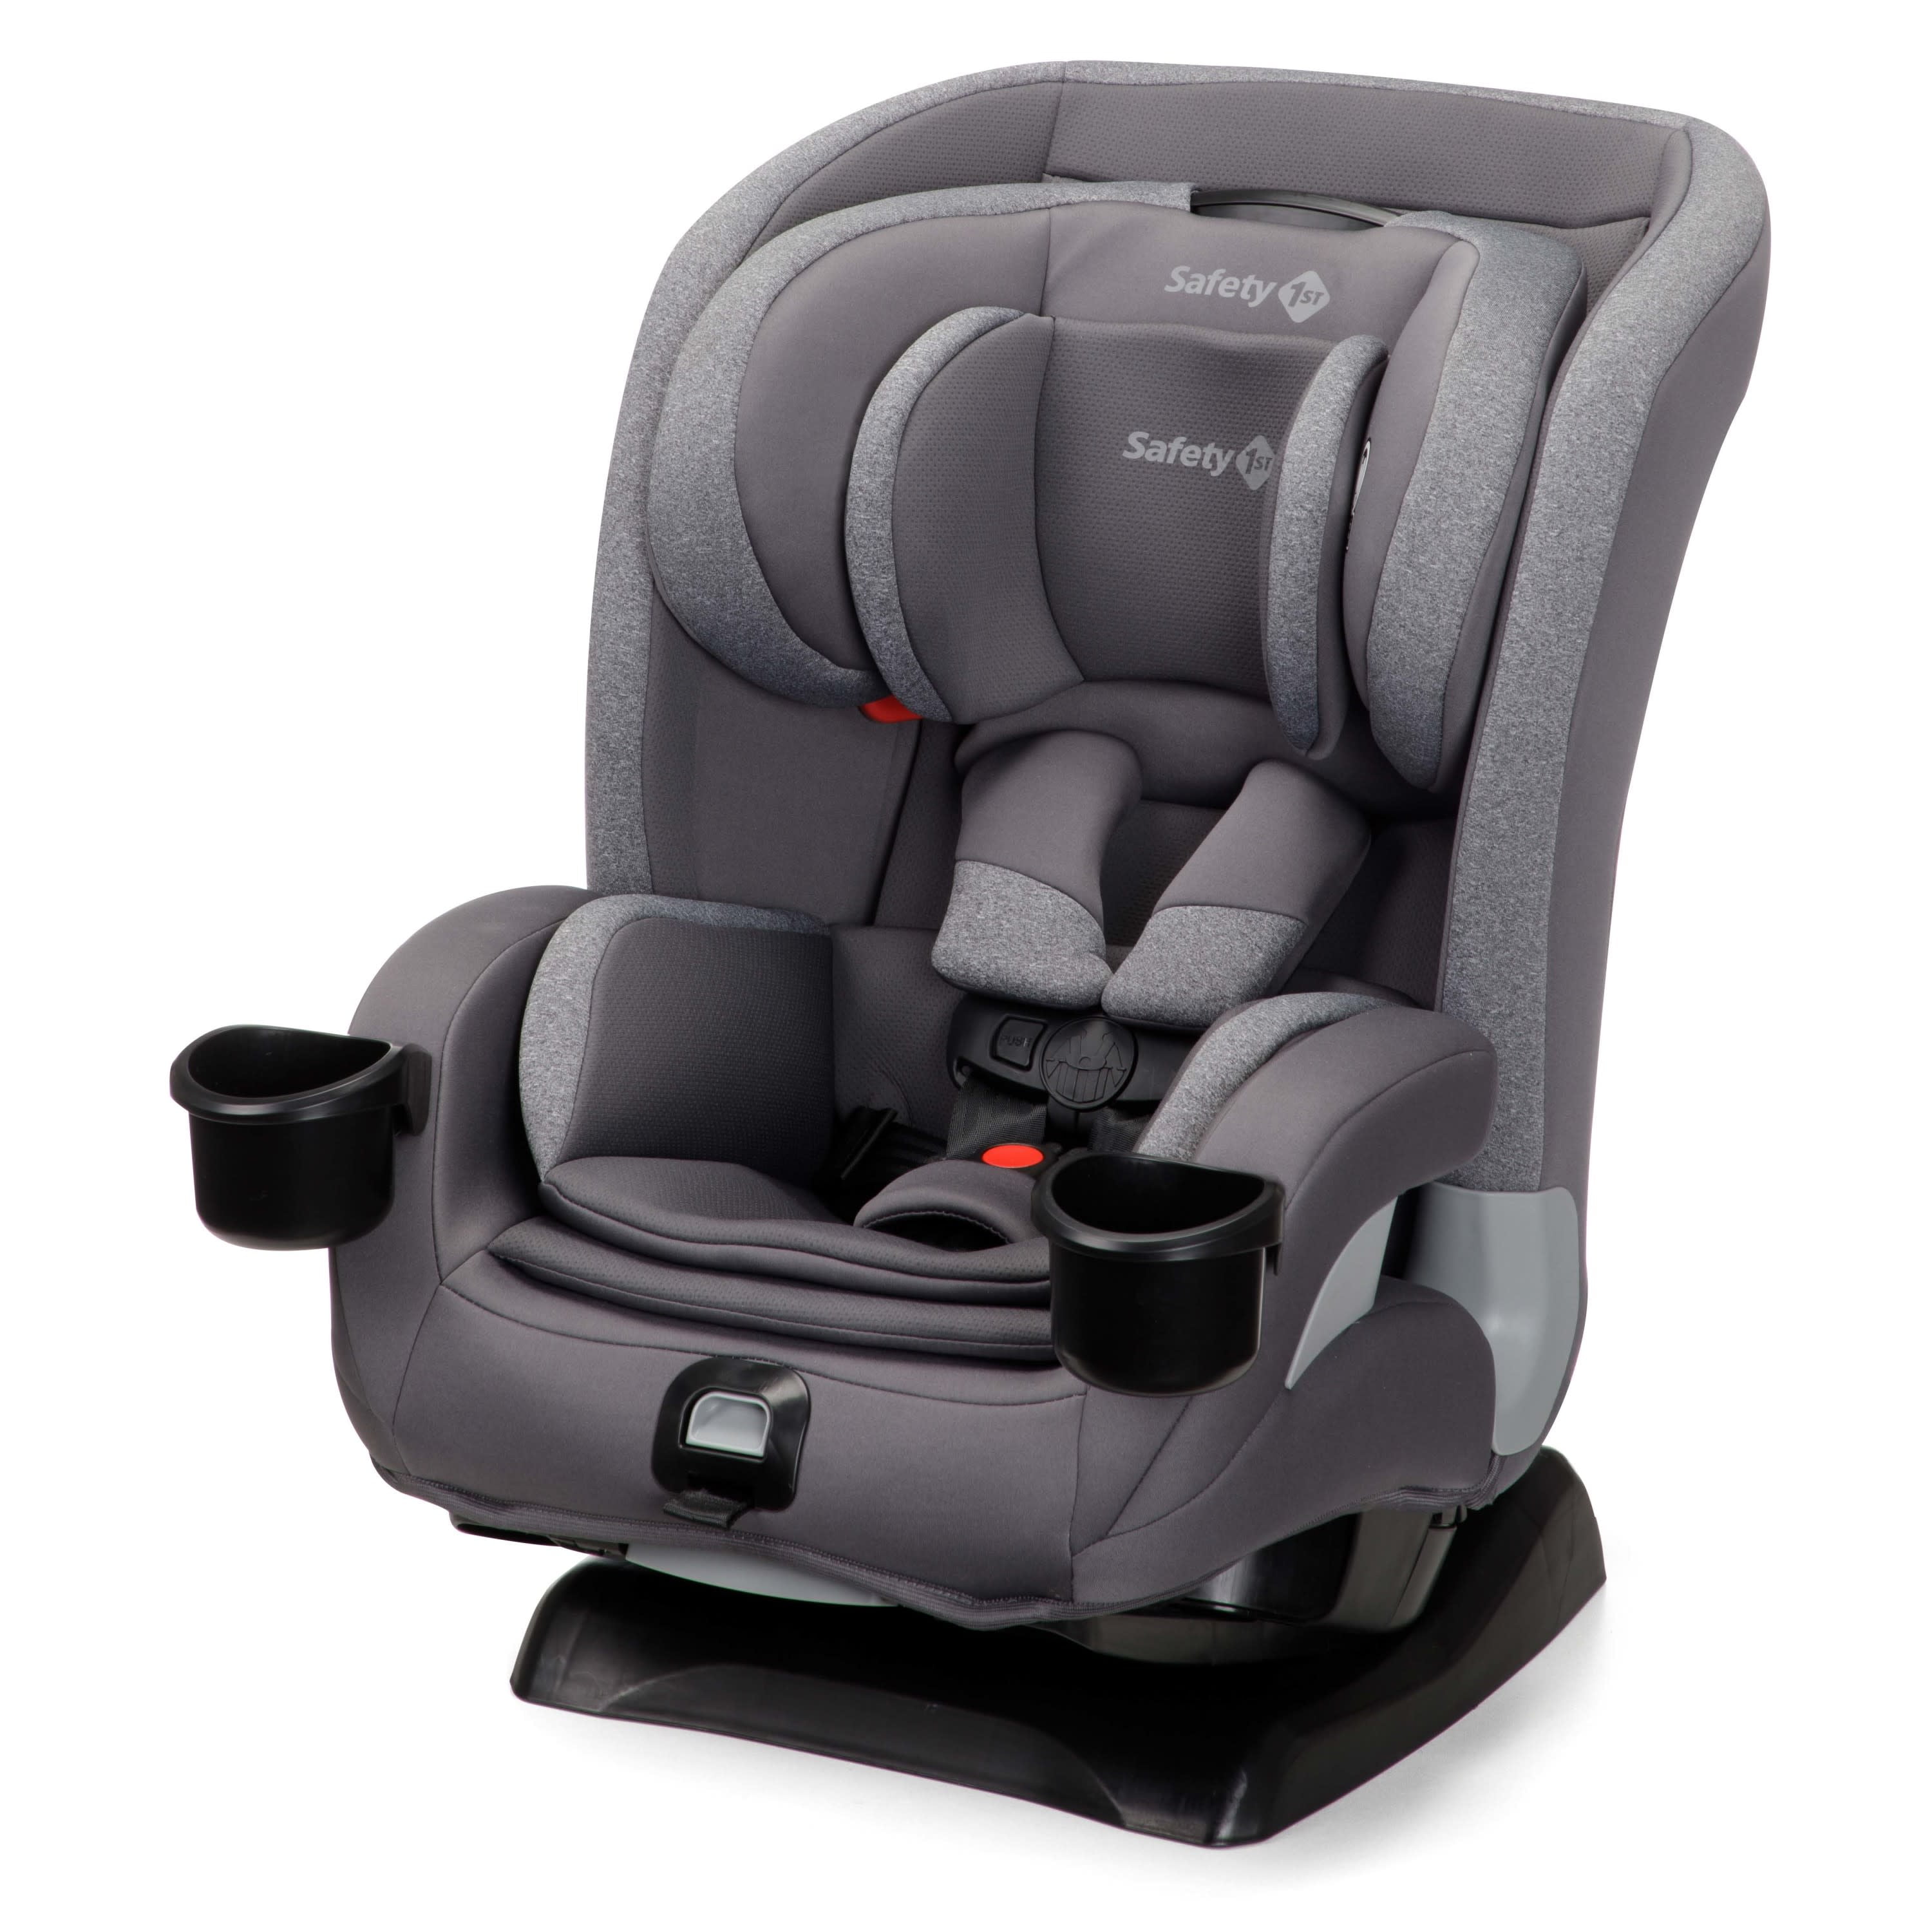 Safety 1st EverFit All-in-One Car Seat (Choose Your Color) - Sam's